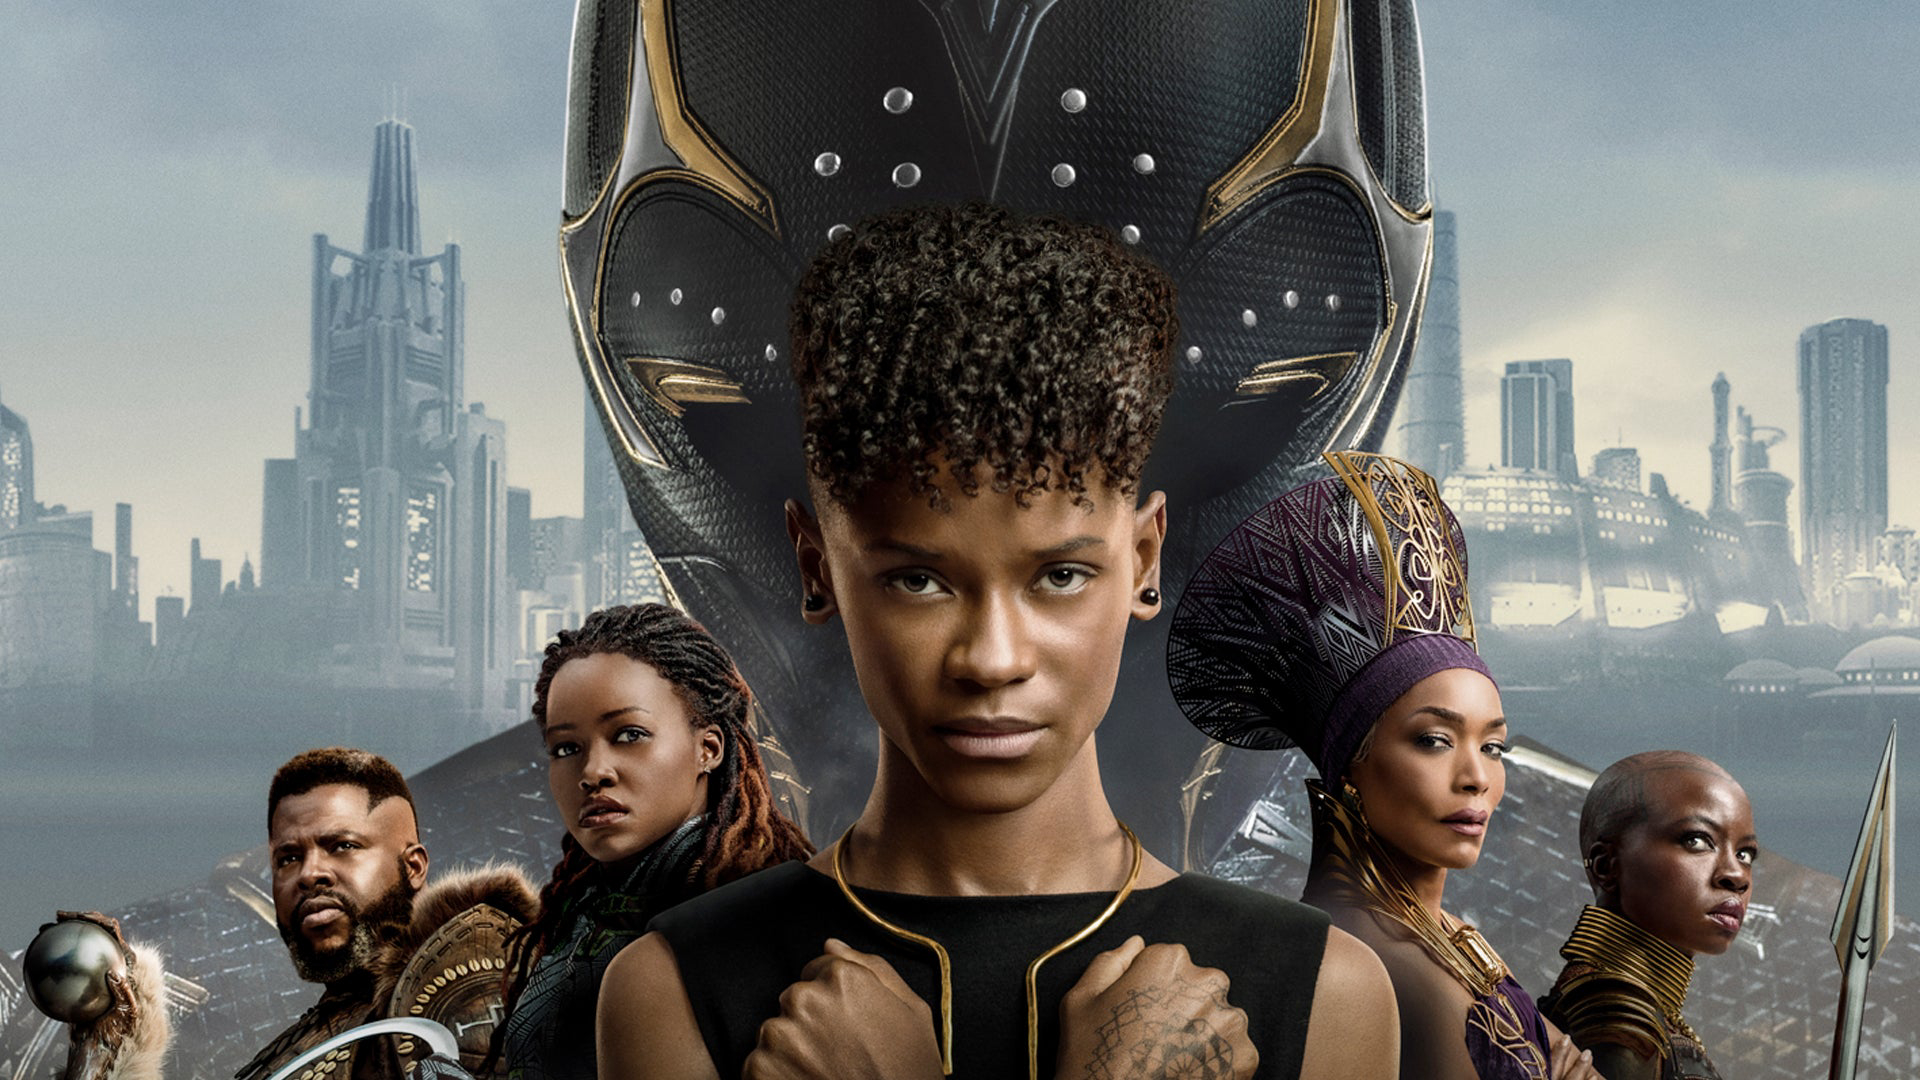 You are currently viewing French Defence Ministry Condemns Black Panther Movie: ‘Unacceptable’ Resemblance of French Troops | The African Exponent.